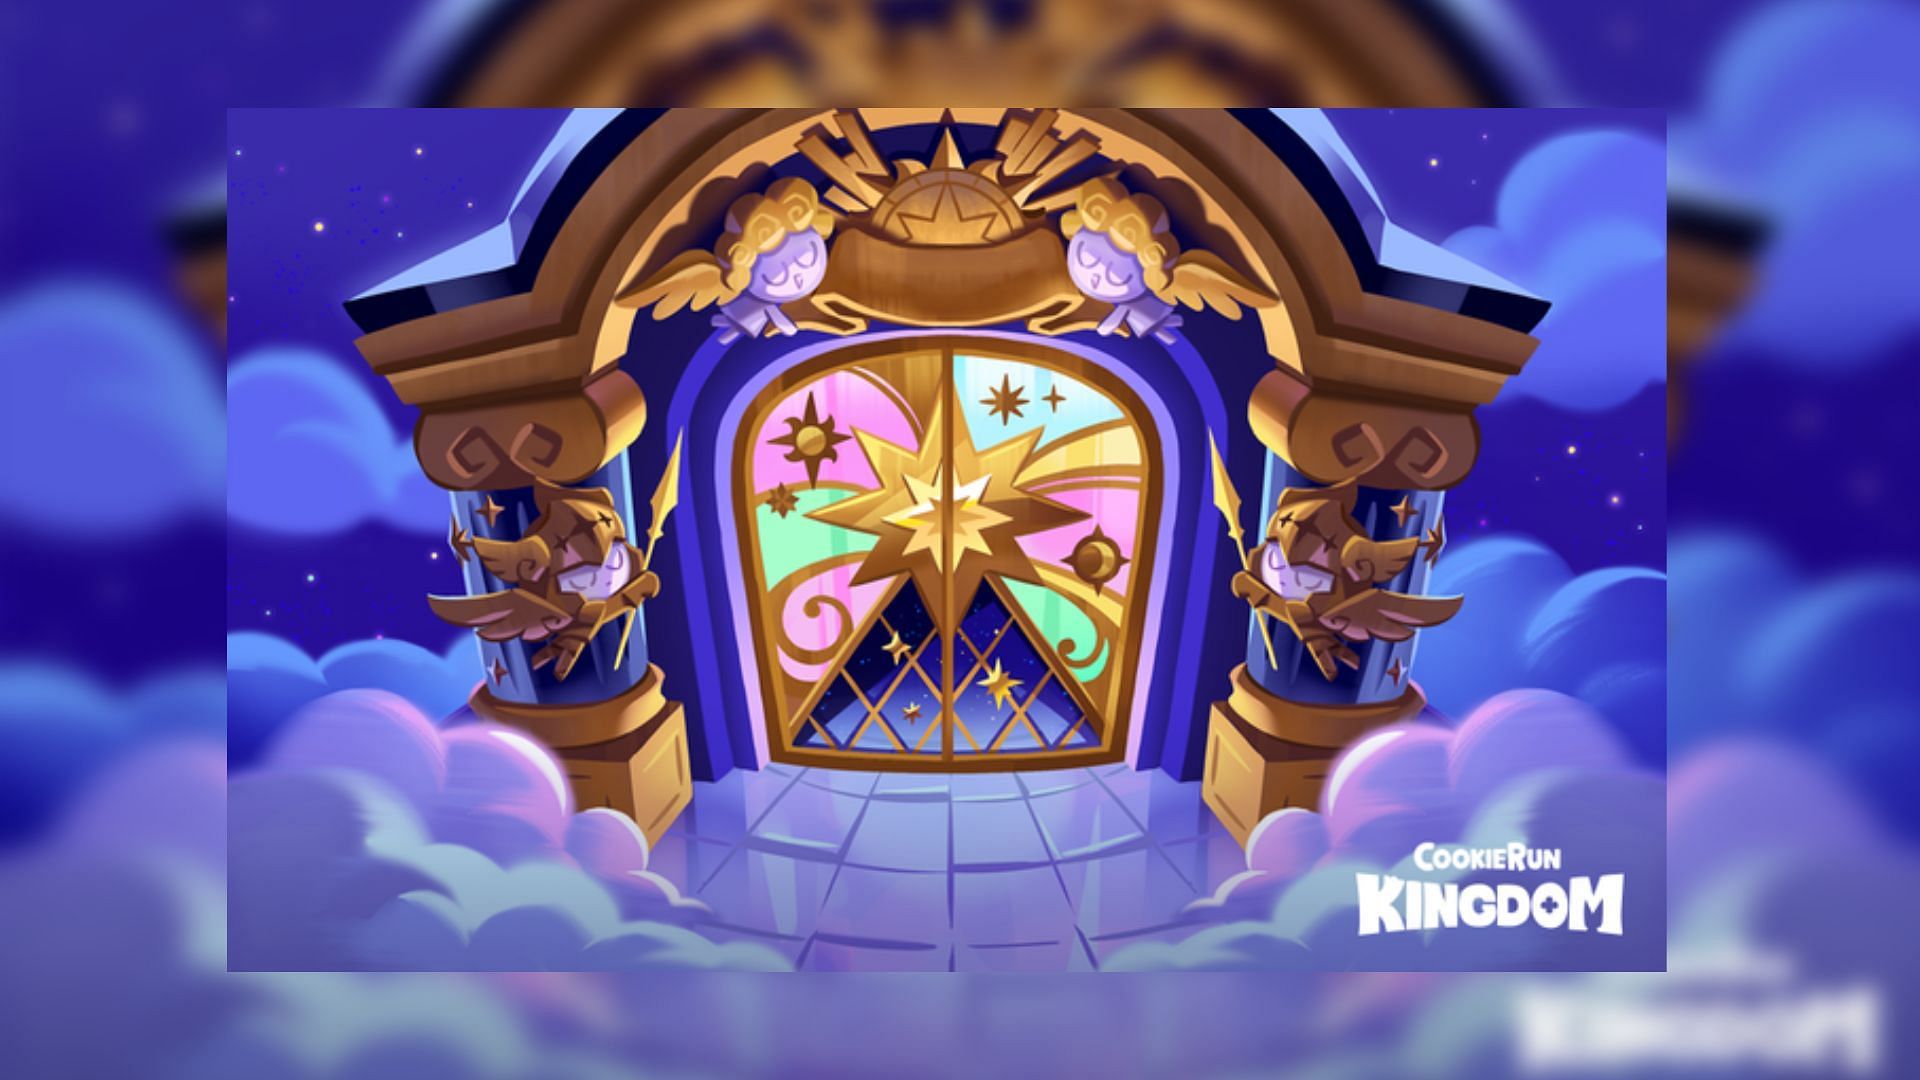 5 reasons to be excited for next Cookie Run Kingdom update